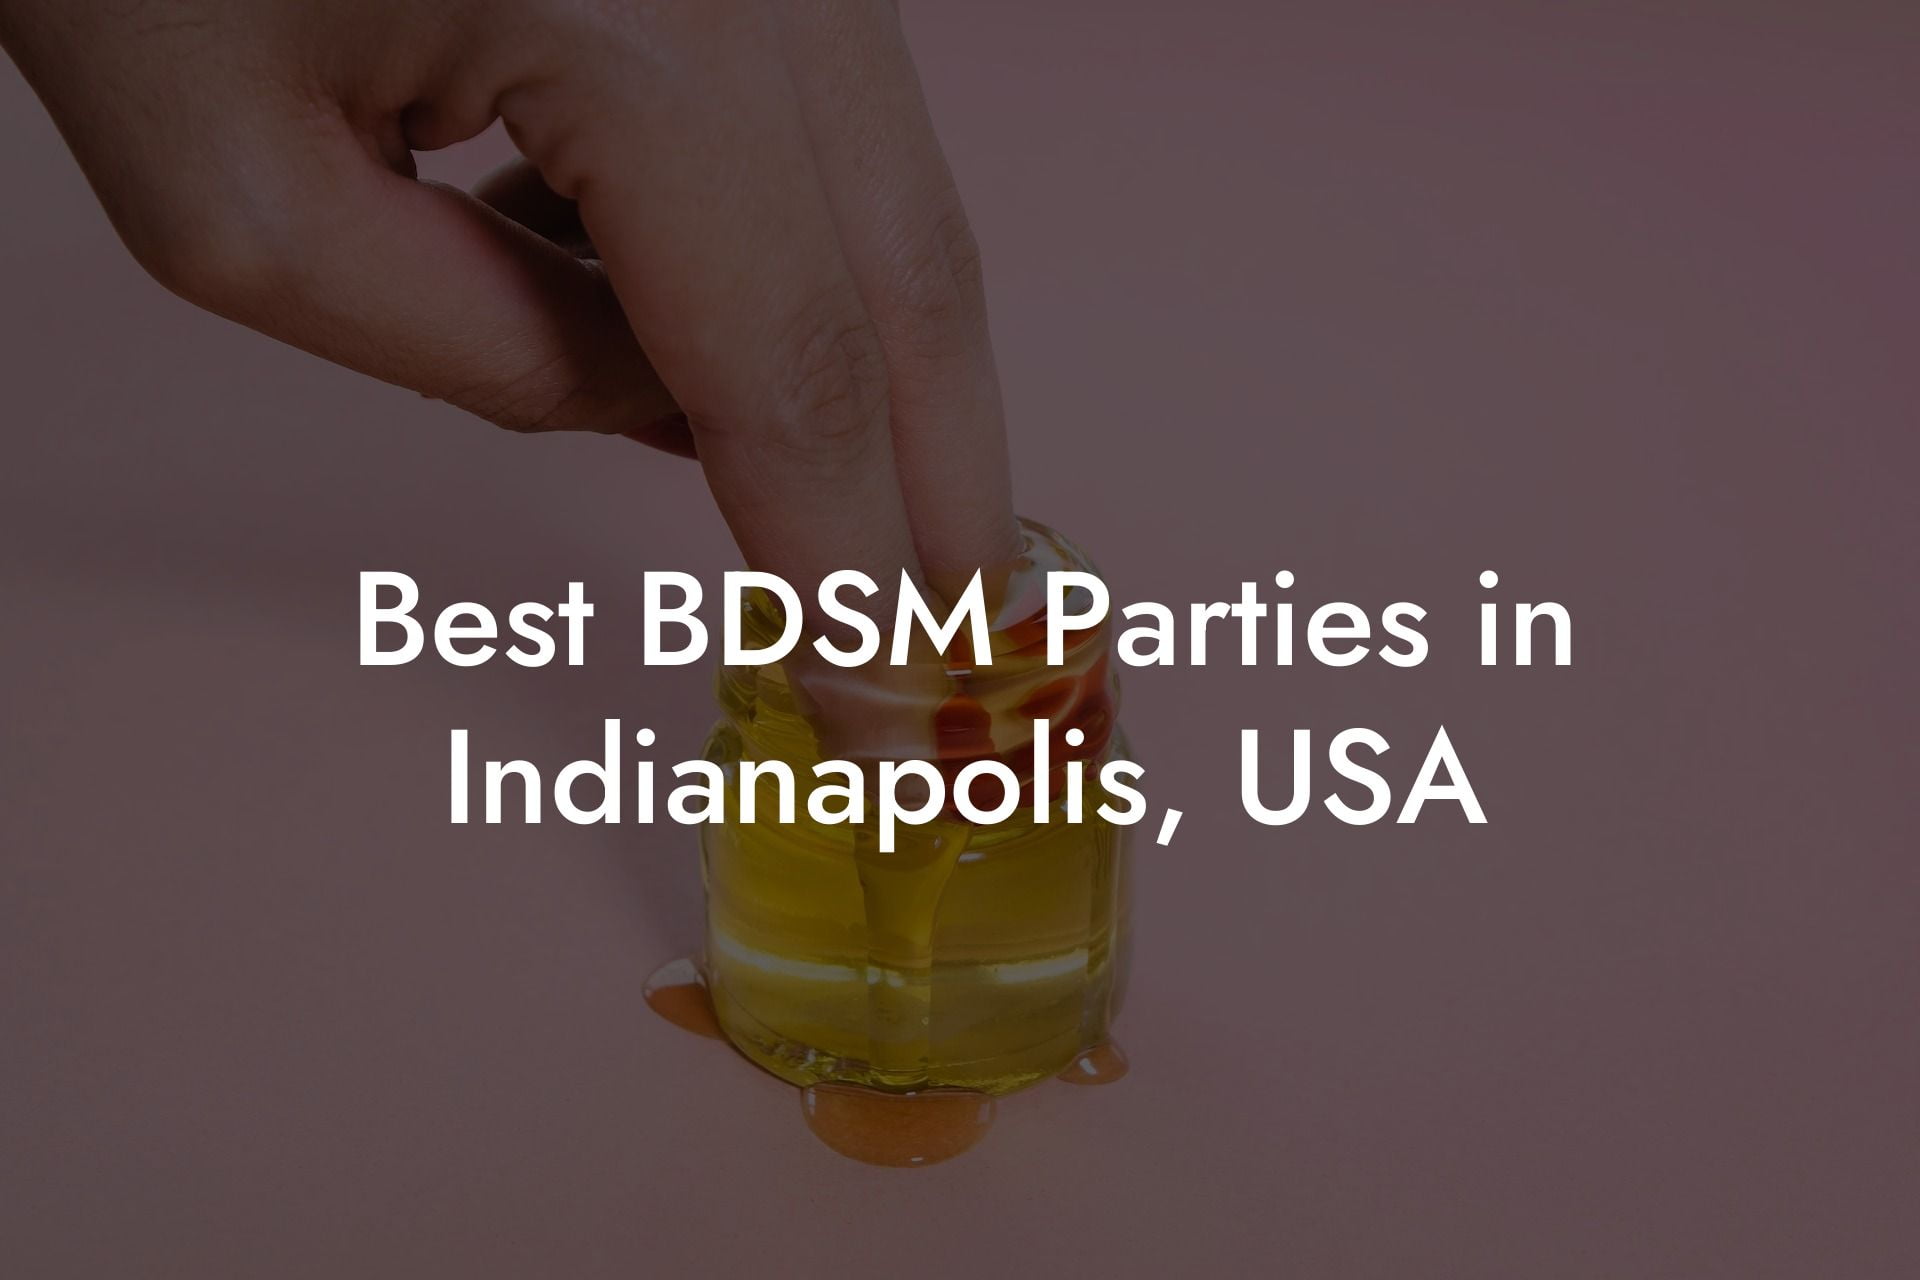 Best BDSM Parties in Indianapolis, USA